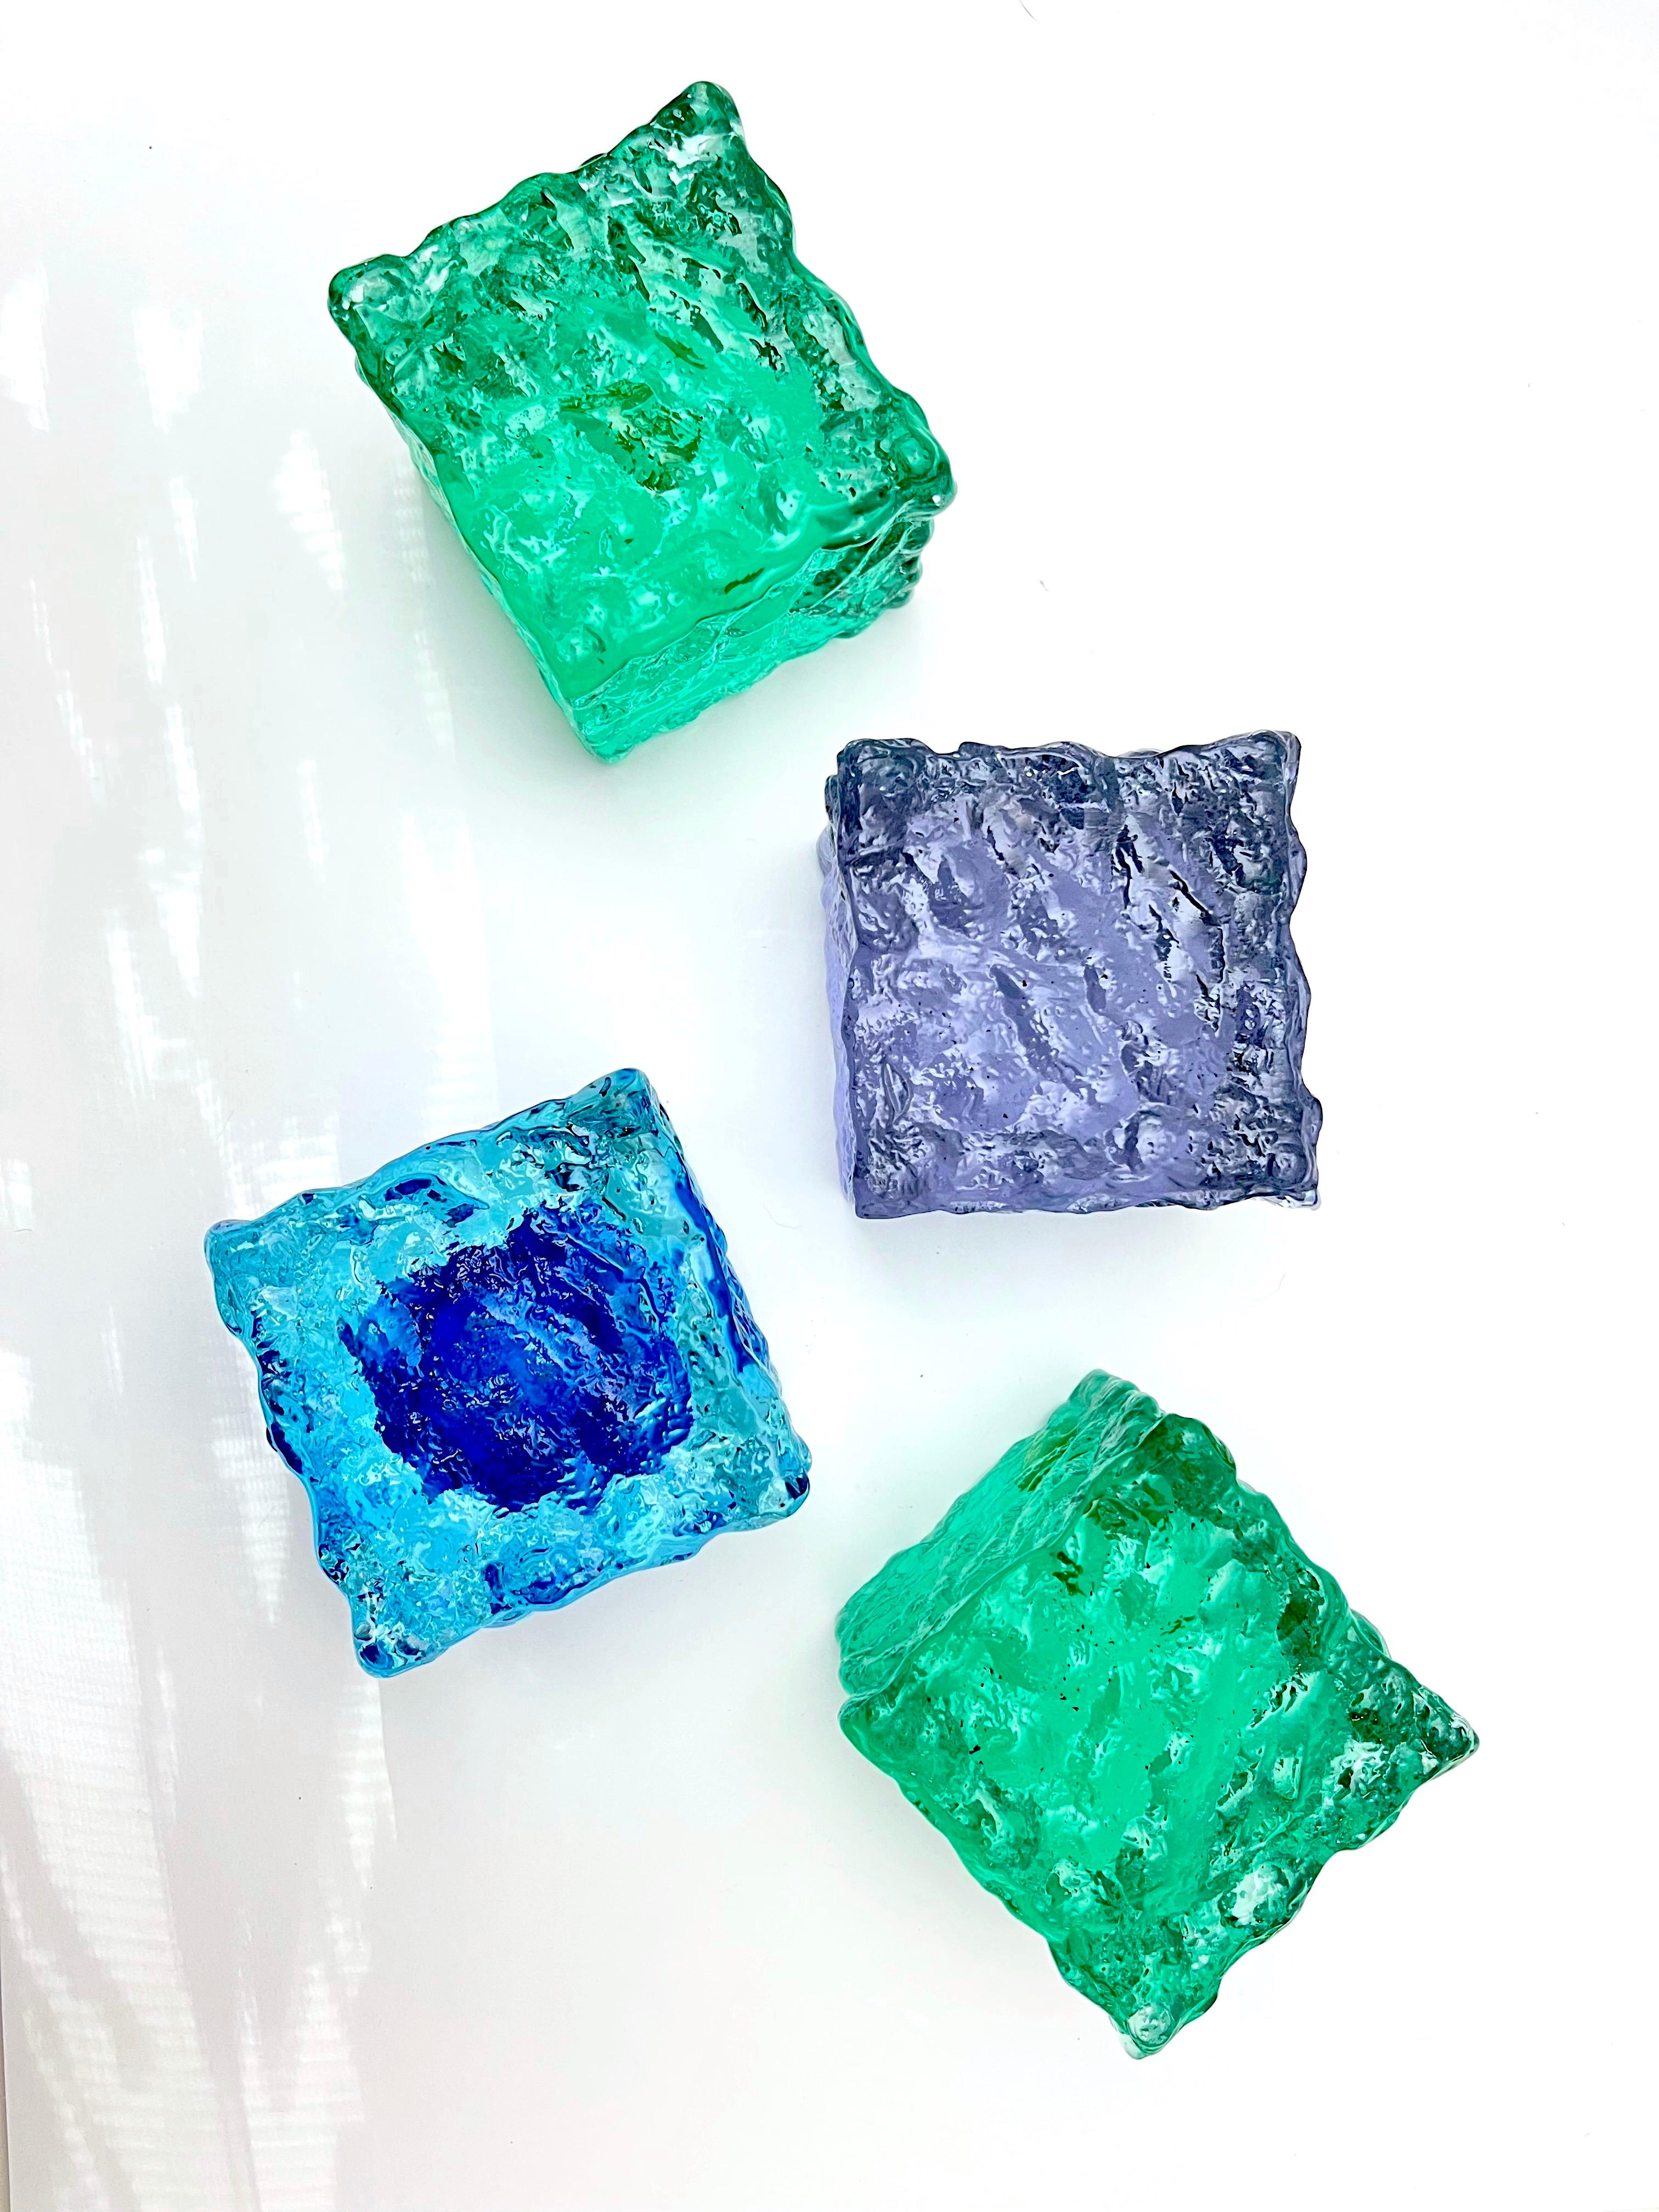 A Rare Find! Stunning Set of Four Murano Seguso Chunky Glass Blocks, two green, one blue and one lavender.  No doubt done by Archimede Seguso the glass master and a great color palette to your eyes!
These are a perfect addition for any Murano